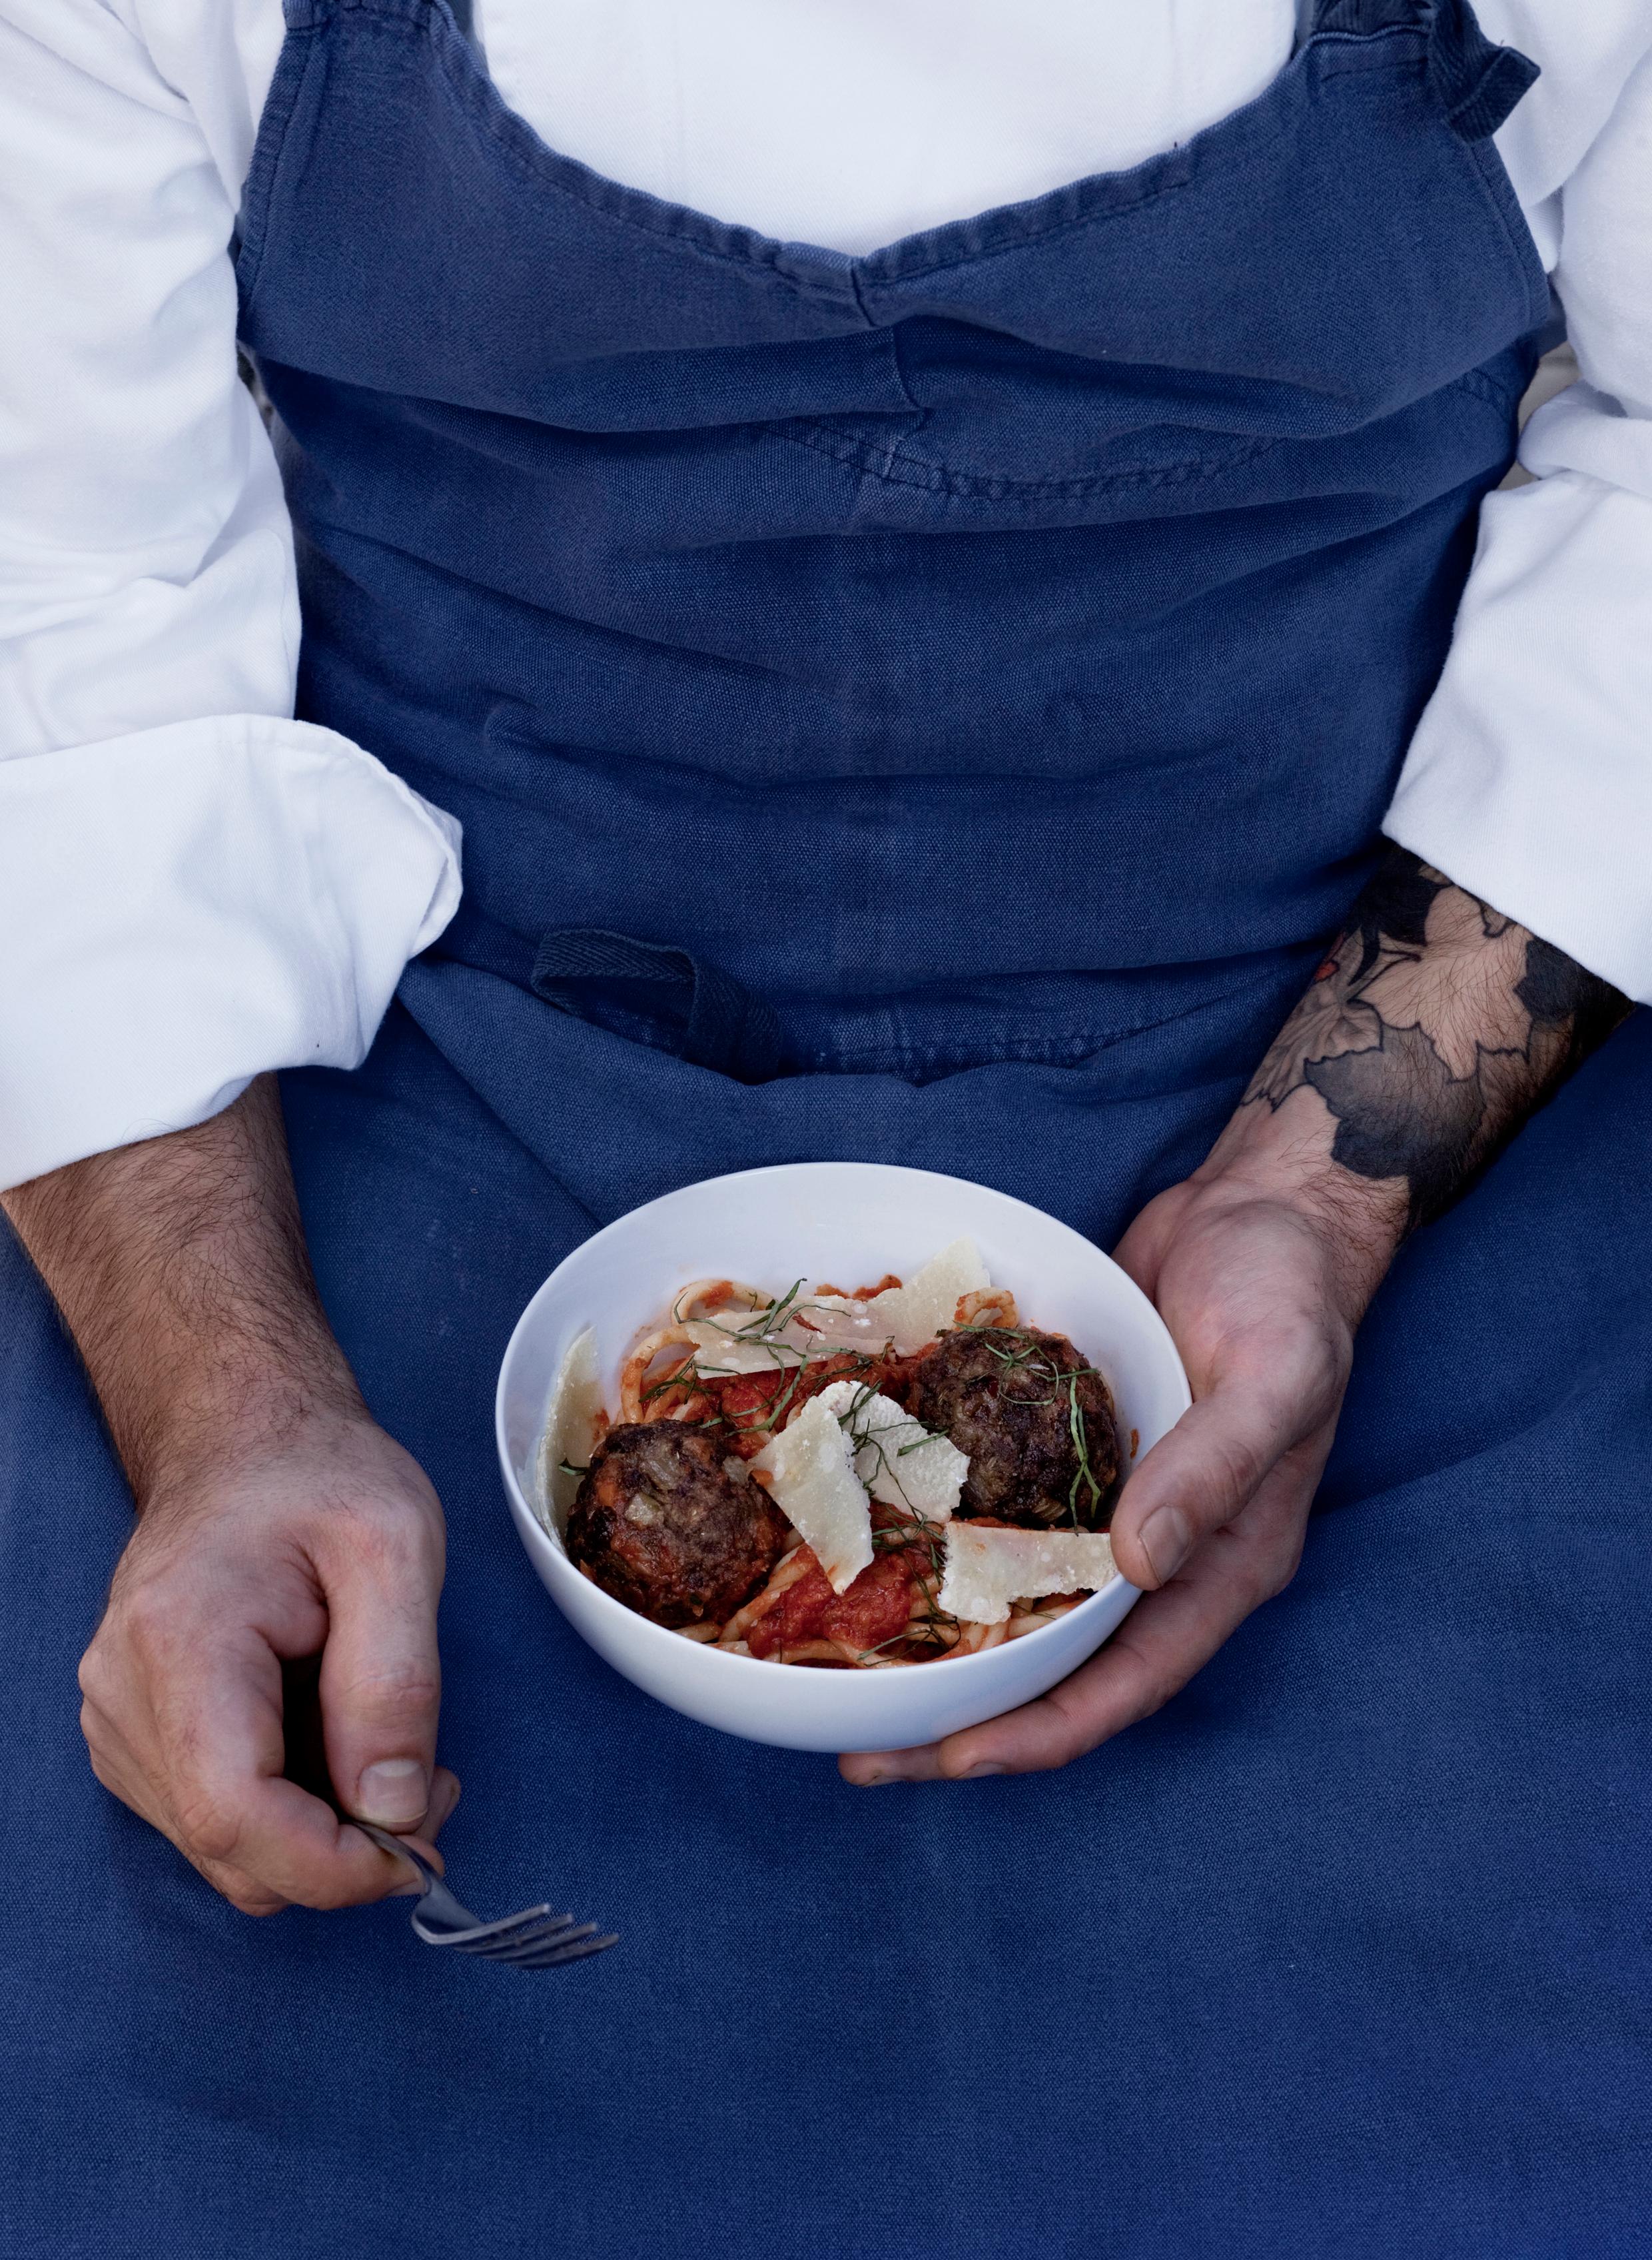 Eating with the Chefs documents the daily meal shared by chefs and front-of-house staff at eighteen top restaurants including Noma, Le Chateaubriand and The French Laundry. 

Captured through exquisite photography by Per-Anders Jörgensen and